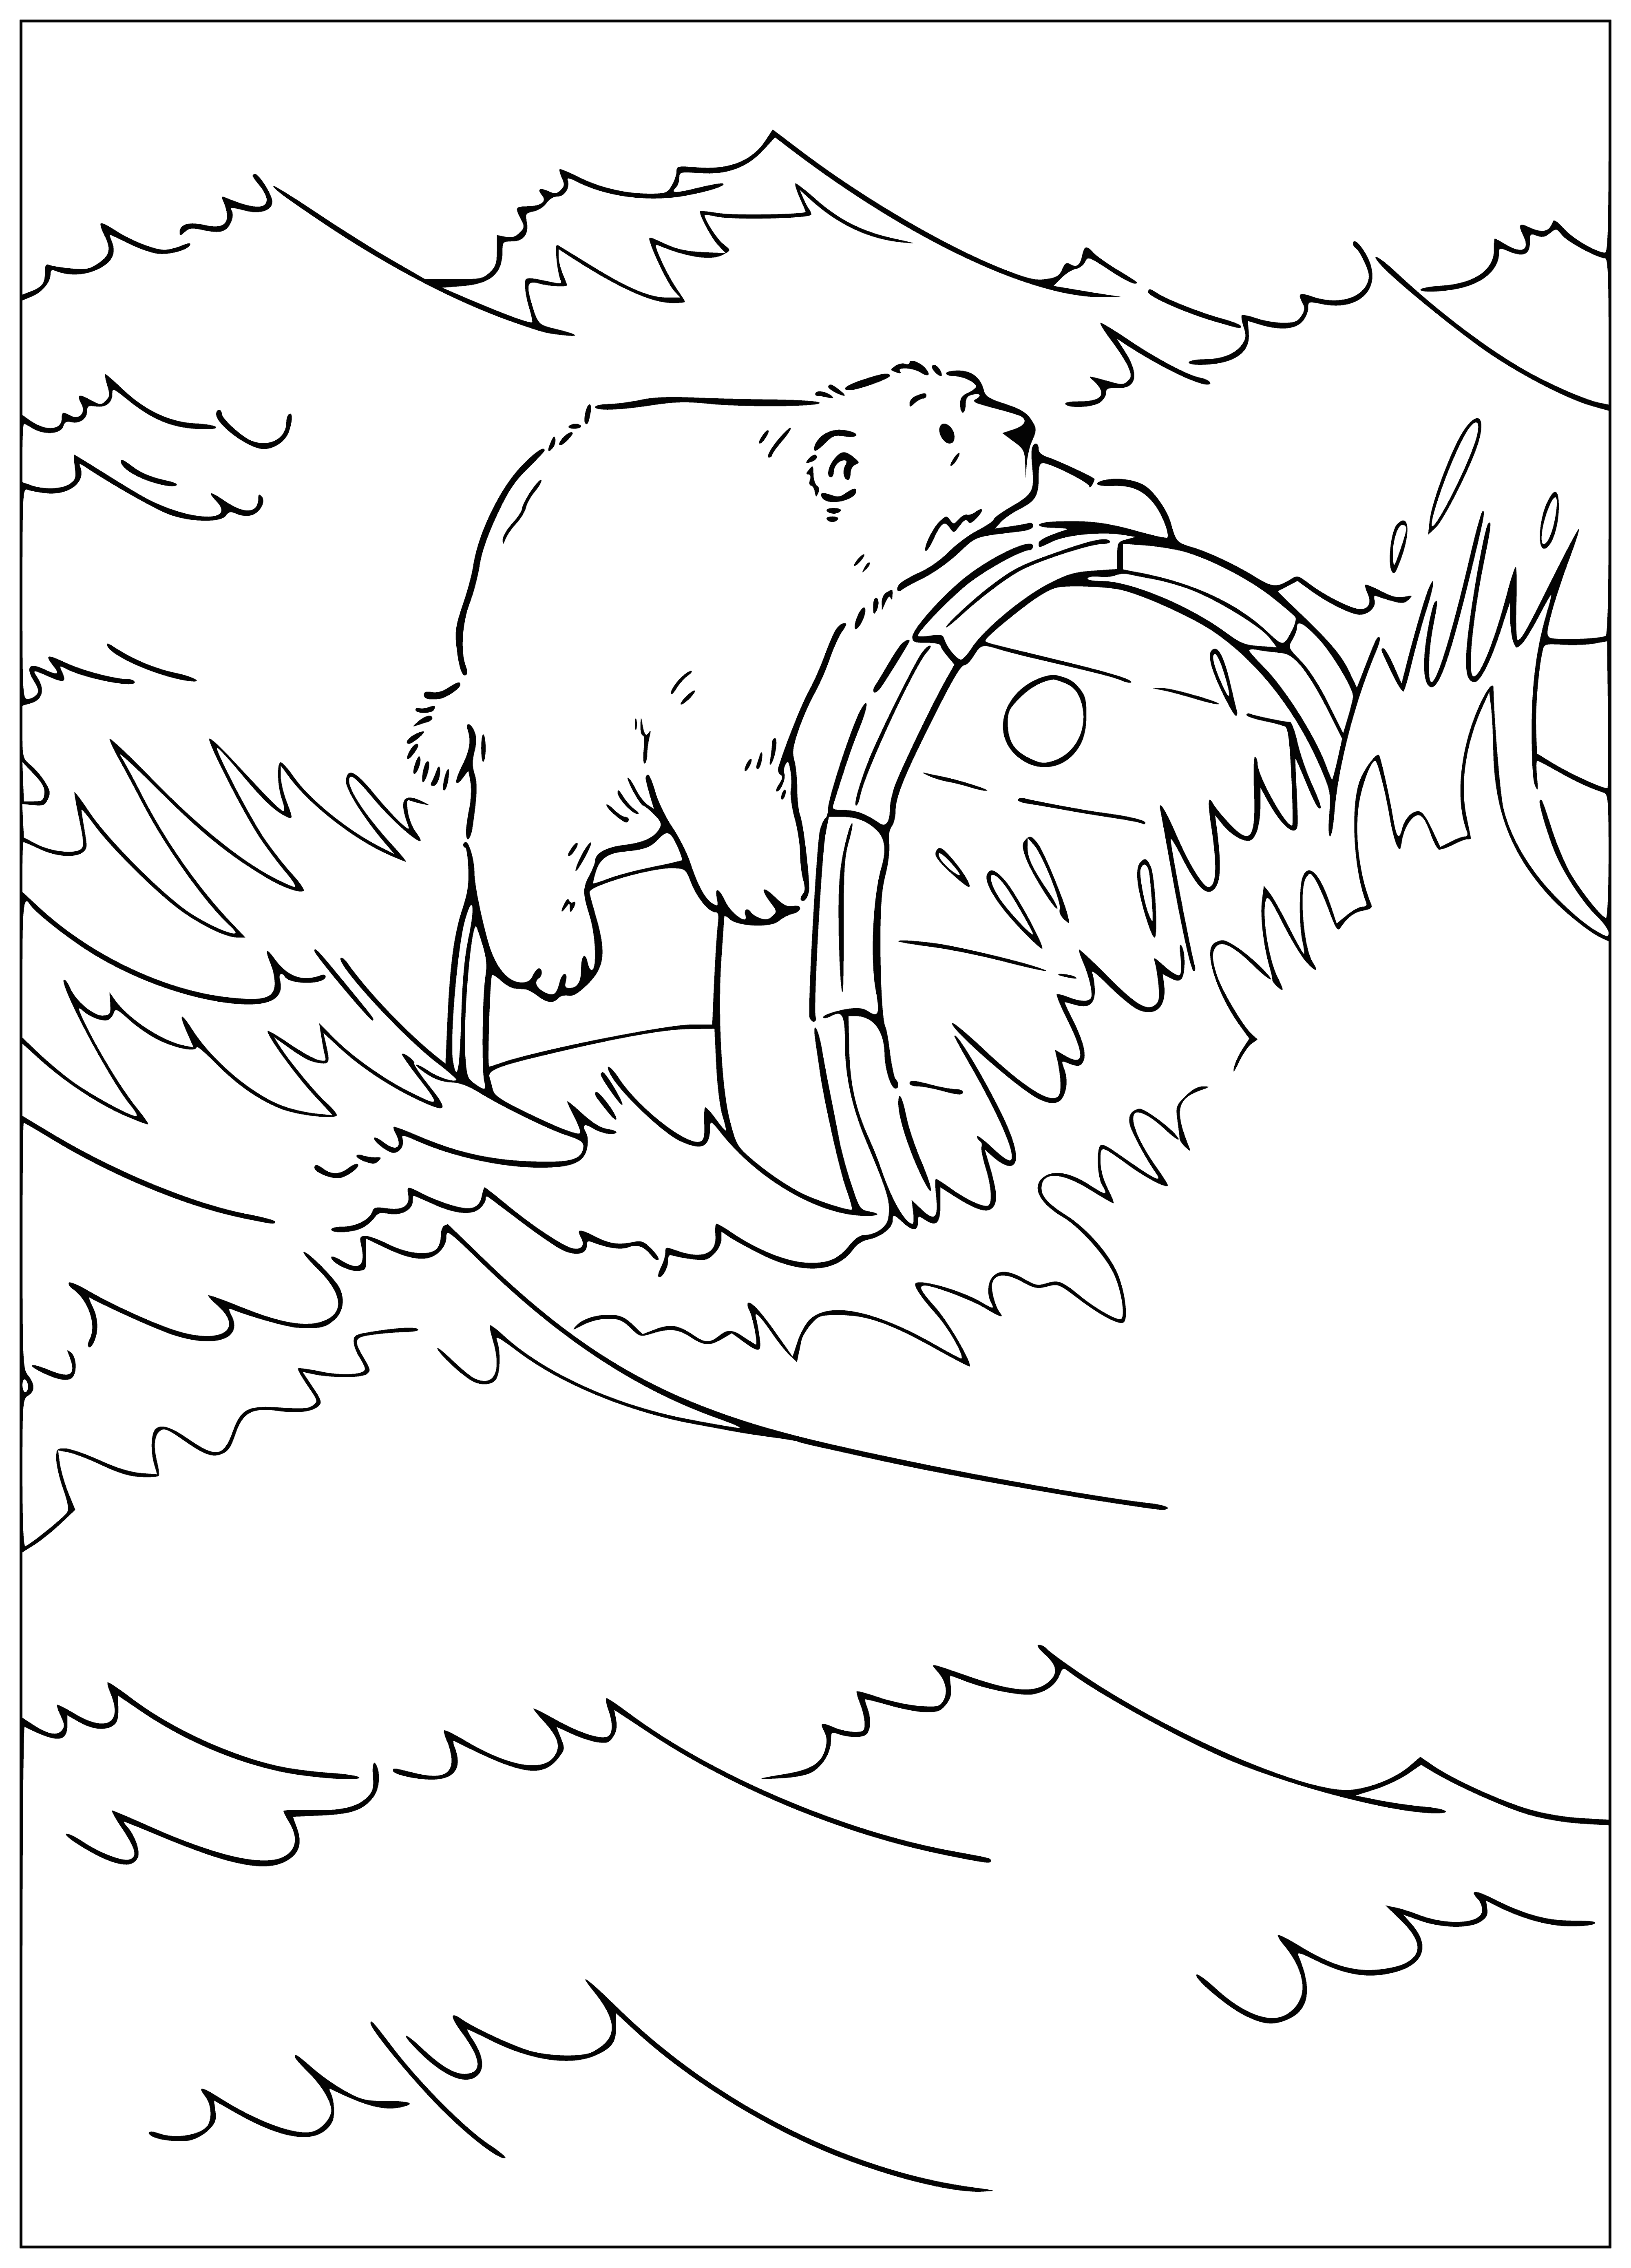 The storm coloring page